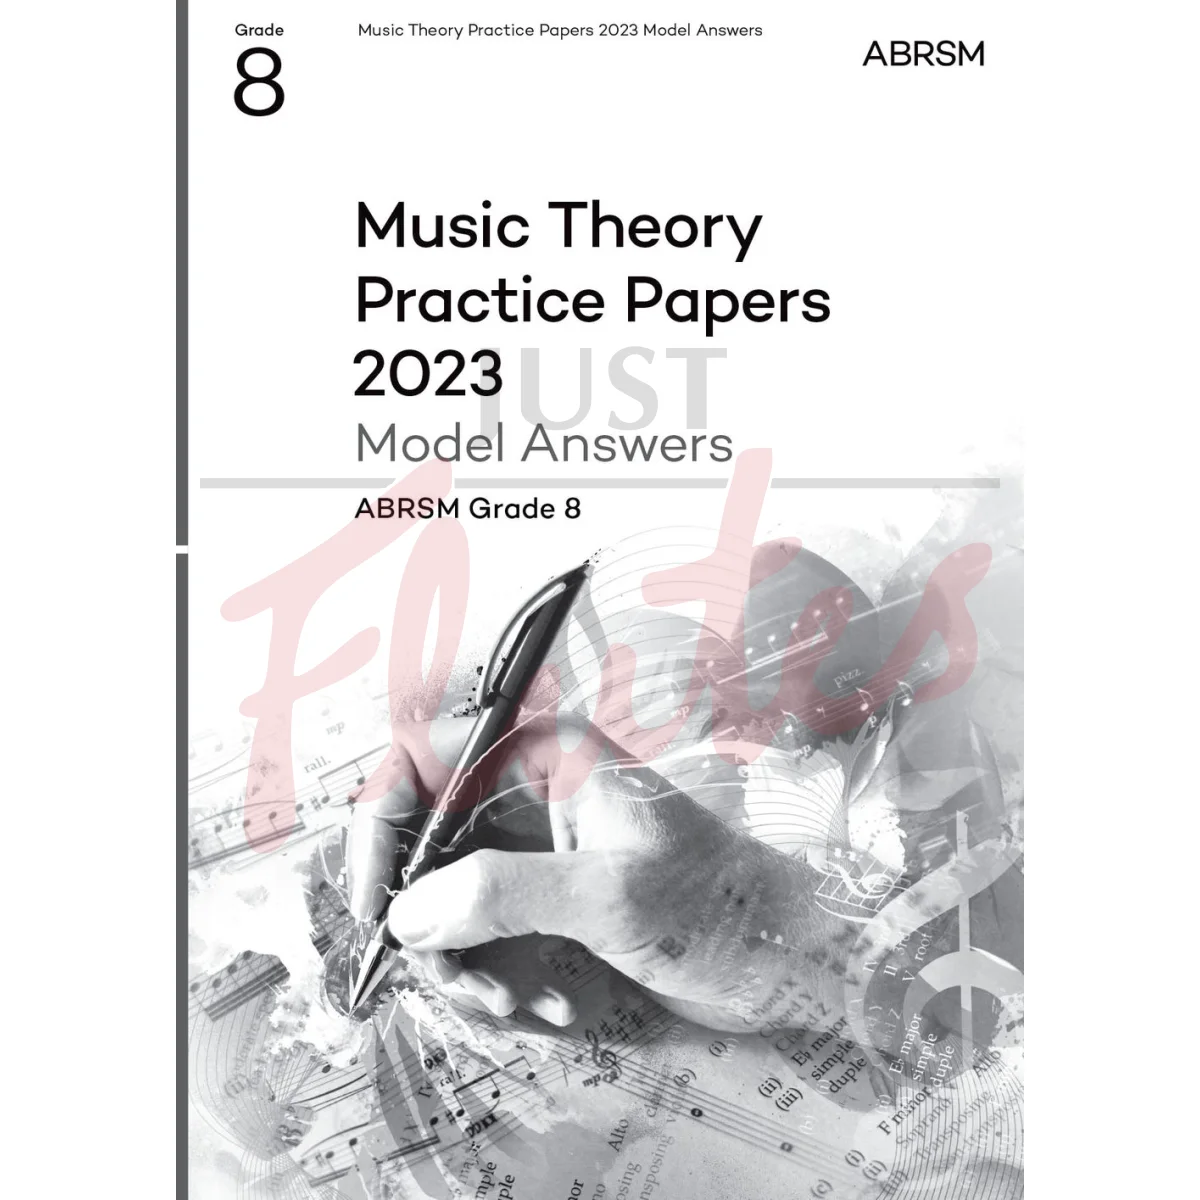 Music Theory Practice Papers 2023 Grade 8 - Model Answers